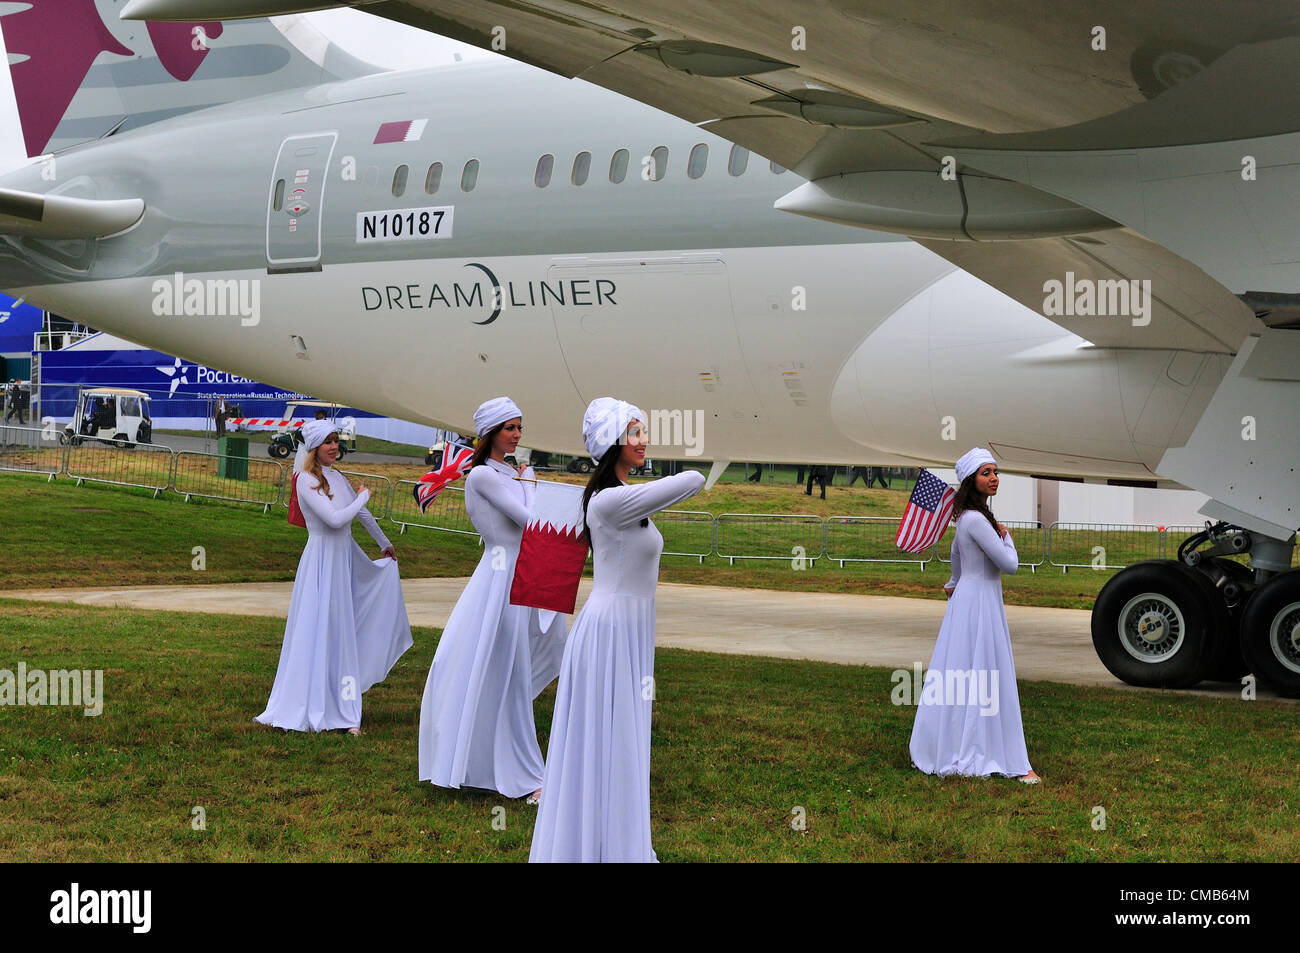 Farnborough, UK. Monday 9th July 2012.  Qatar Airways dancers dance around the US Plane maker Boeing 787  jet ‘Dreamliner’ at the Farnborough International Airshow 2012 which started today. It is seen as a rival to European Airbus at the Farnborough air show. Qatar Airways participated for the first time in flying displays at the Farnborough International Airshow. Stock Photo